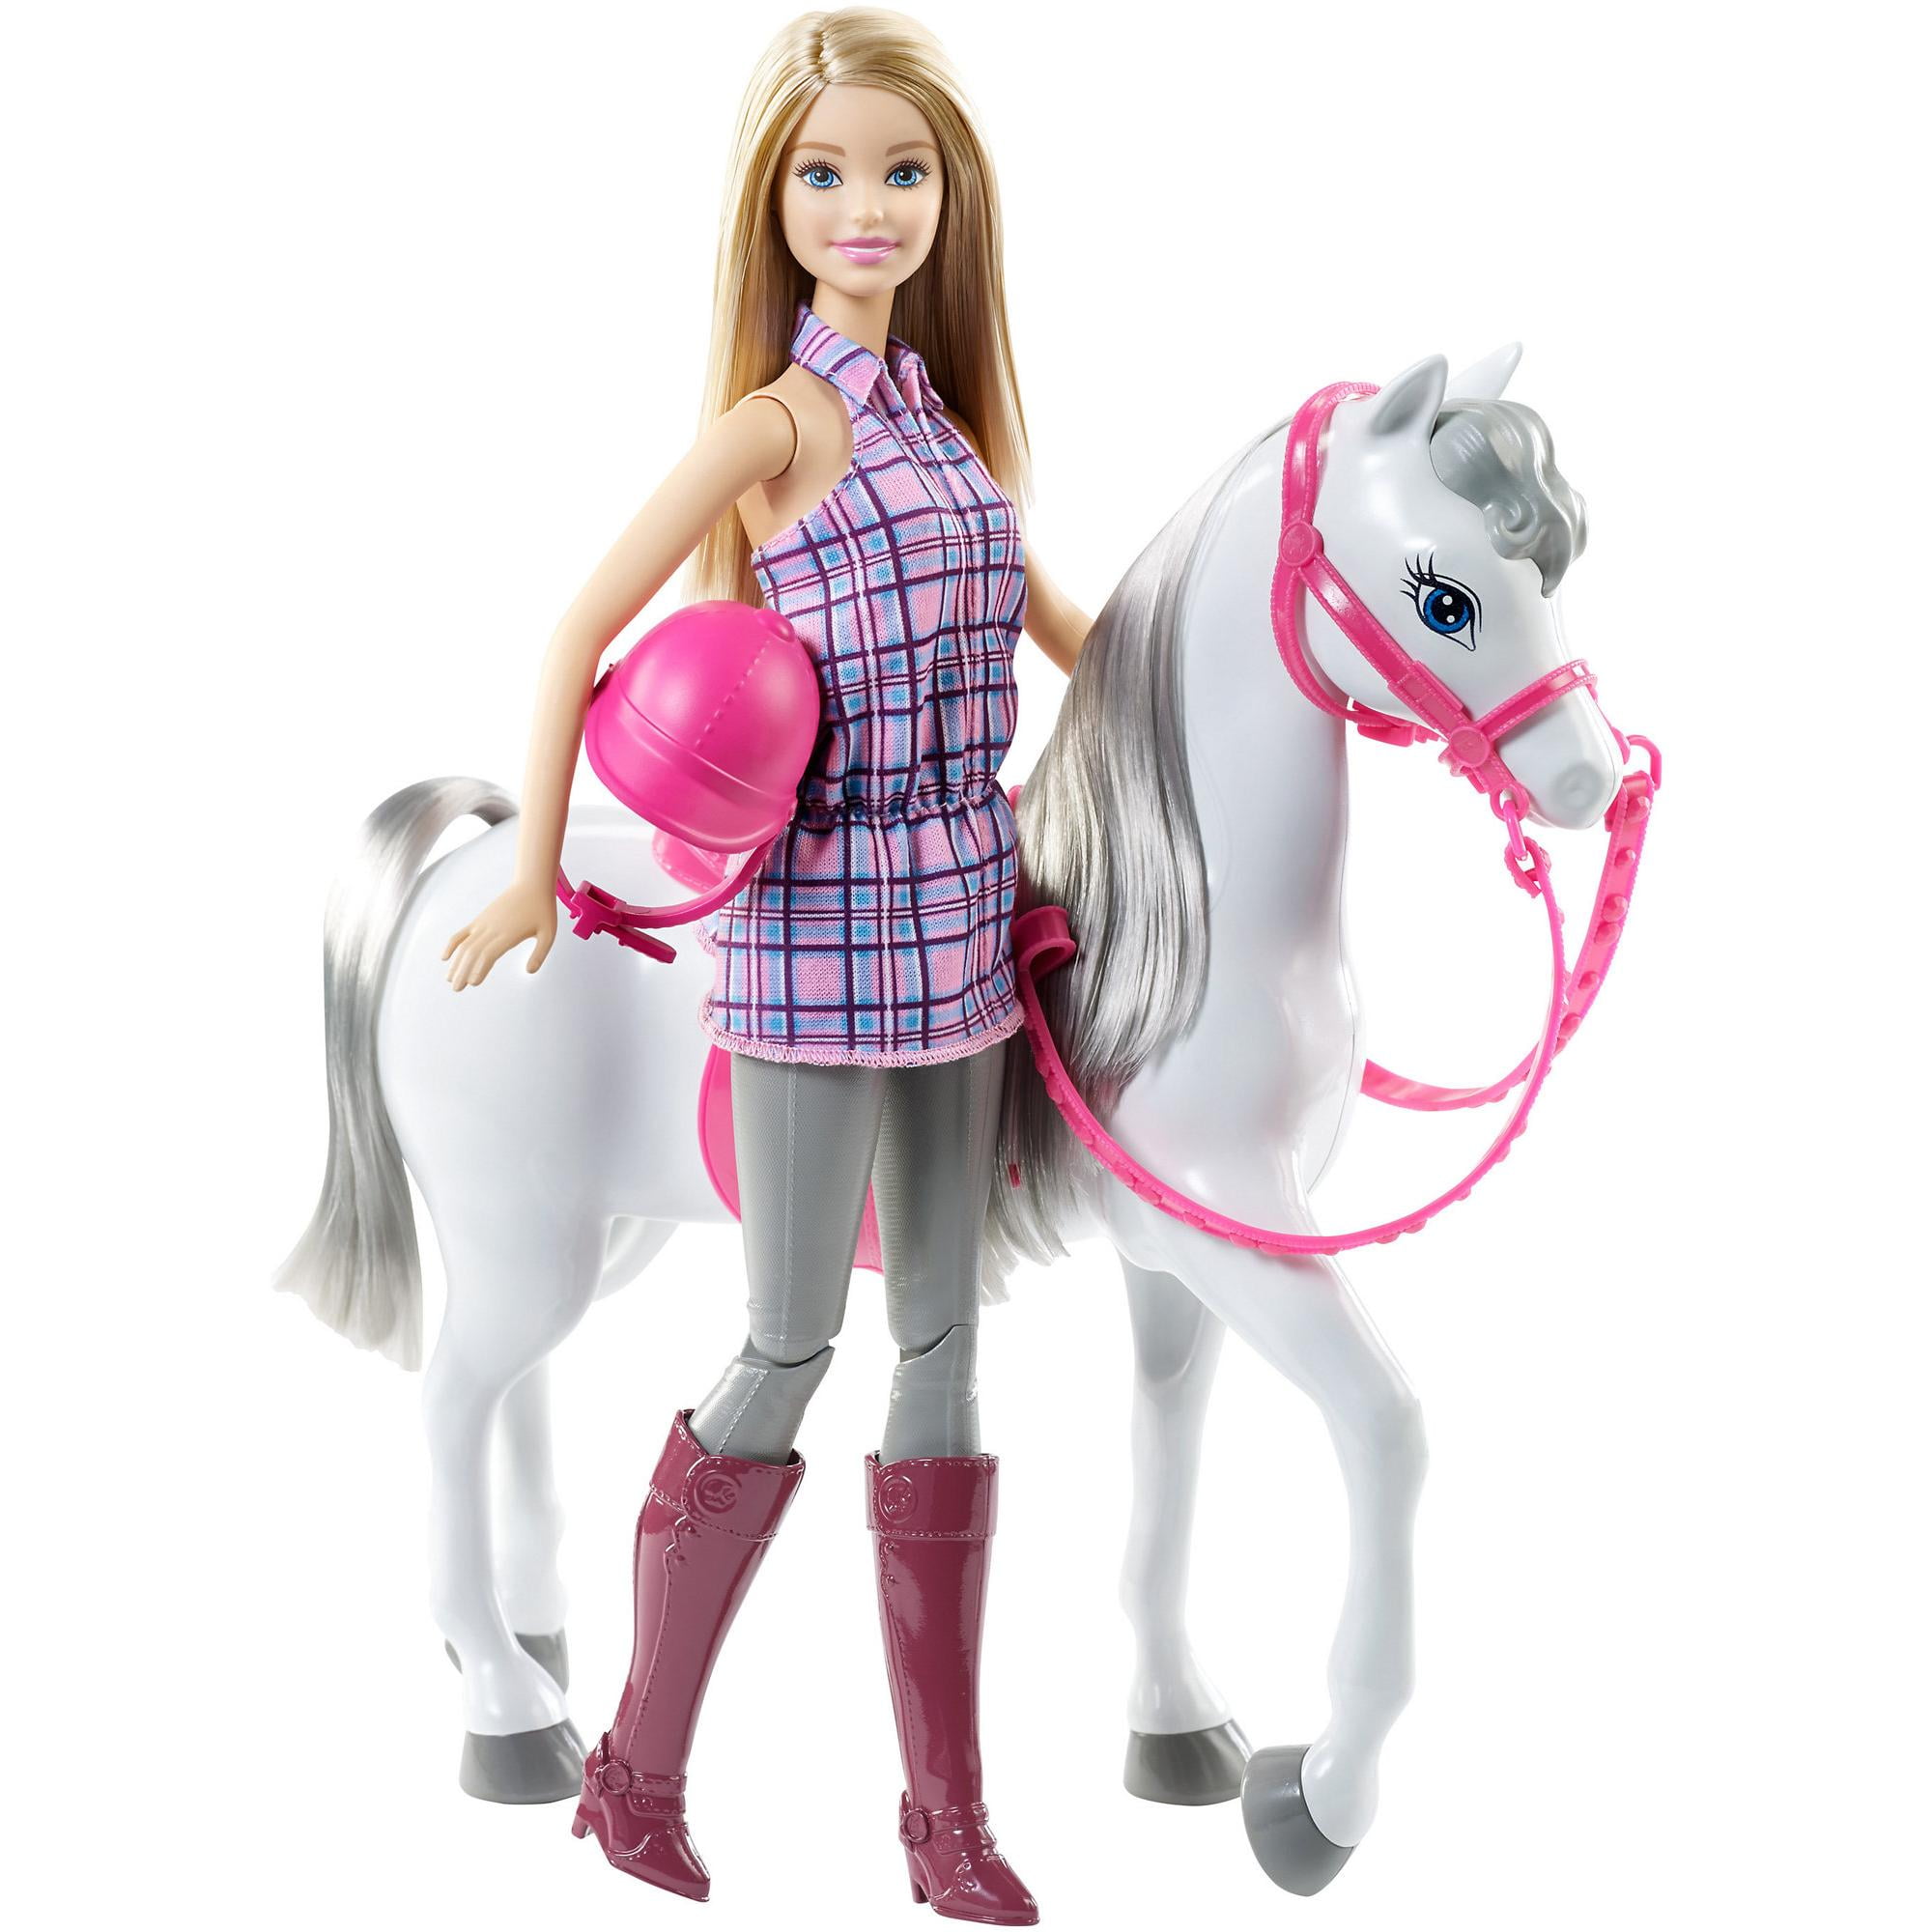 Mattel Barbie Doll Saddle and Ride Gray Toy Pony Horse Kid Play Set, Pink -